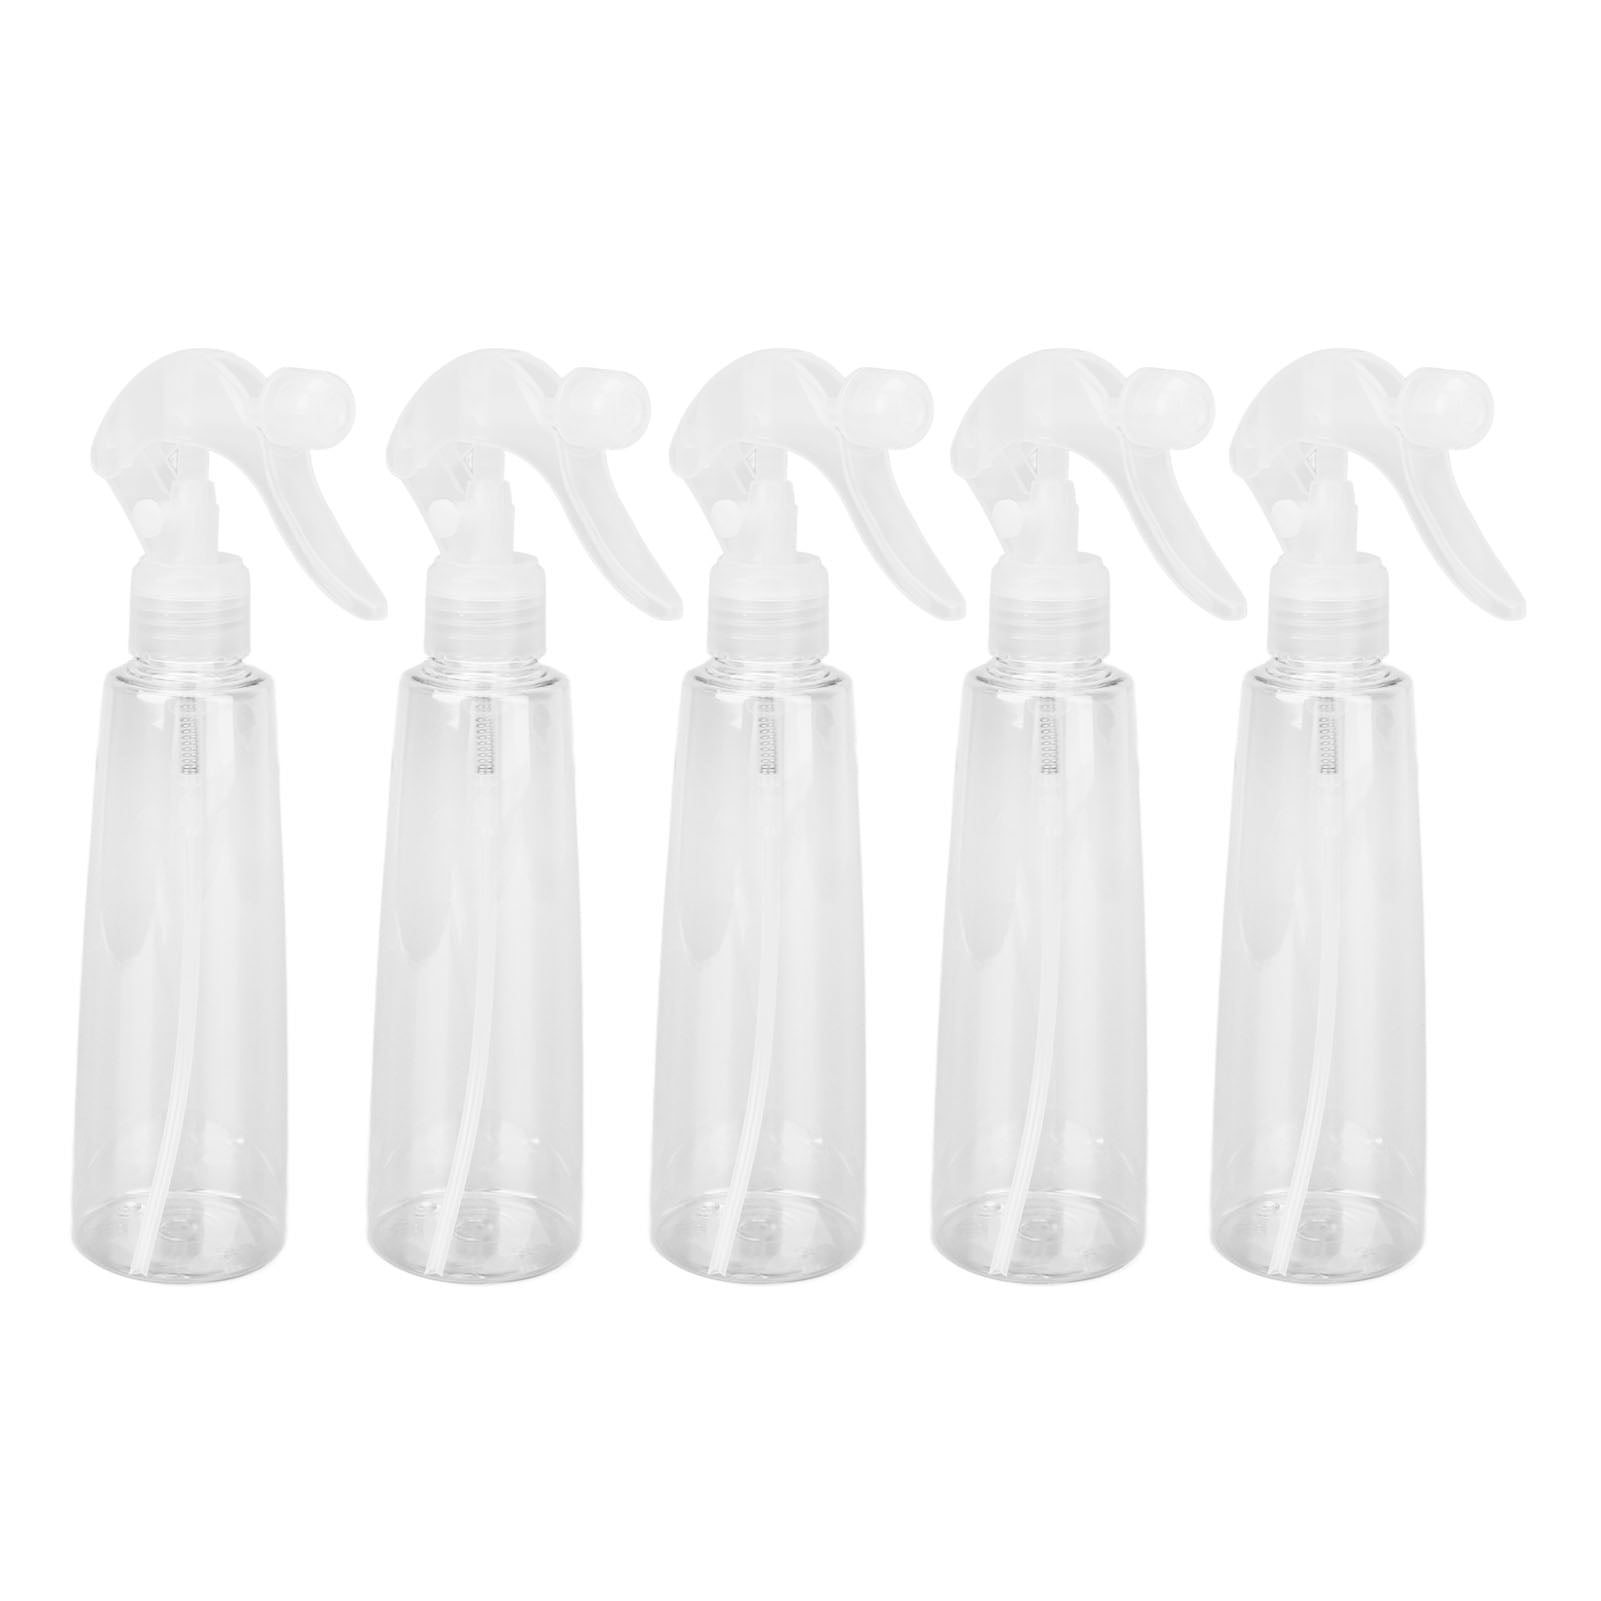 Empty Spray Bottles, Compact Portable Spray Bottles For Travelling ...